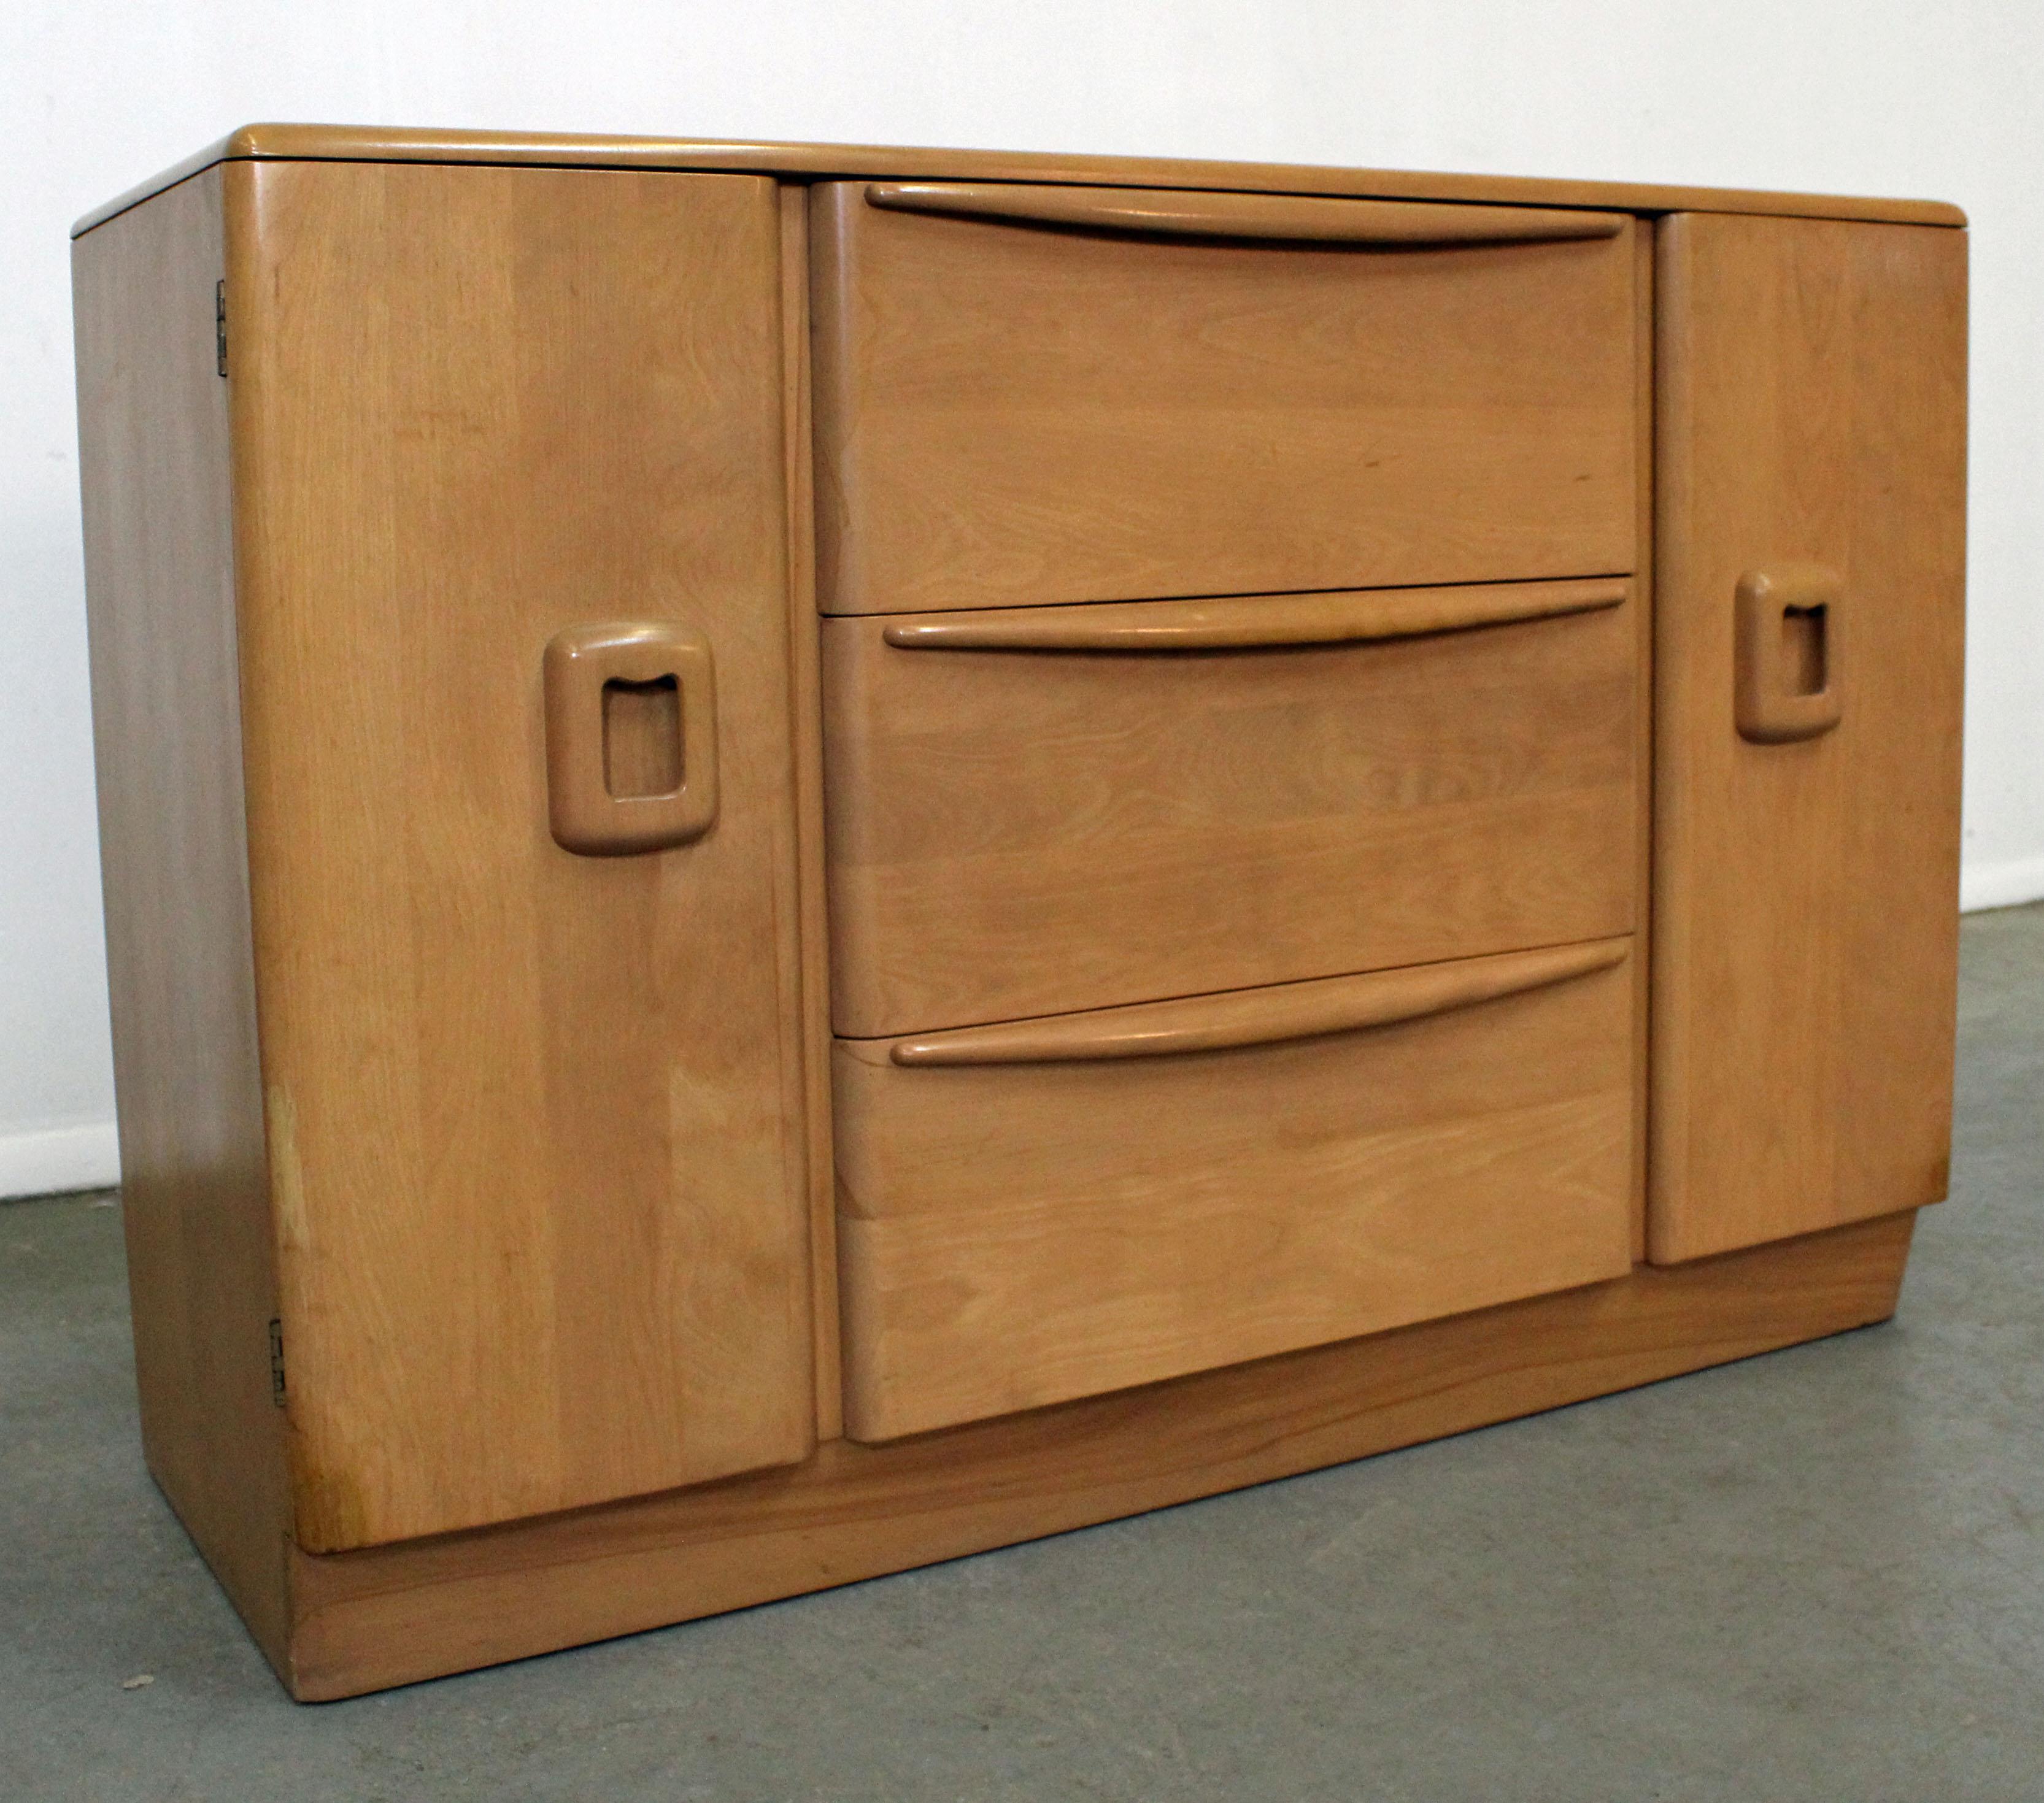 What a find. Offered is a mid-century credenza by Heywood Wakefield. It is made of birch with a 'Champagne' finish. Features a combination of three center drawers and two side doors with shelving. It is in good condition for its age, shows some